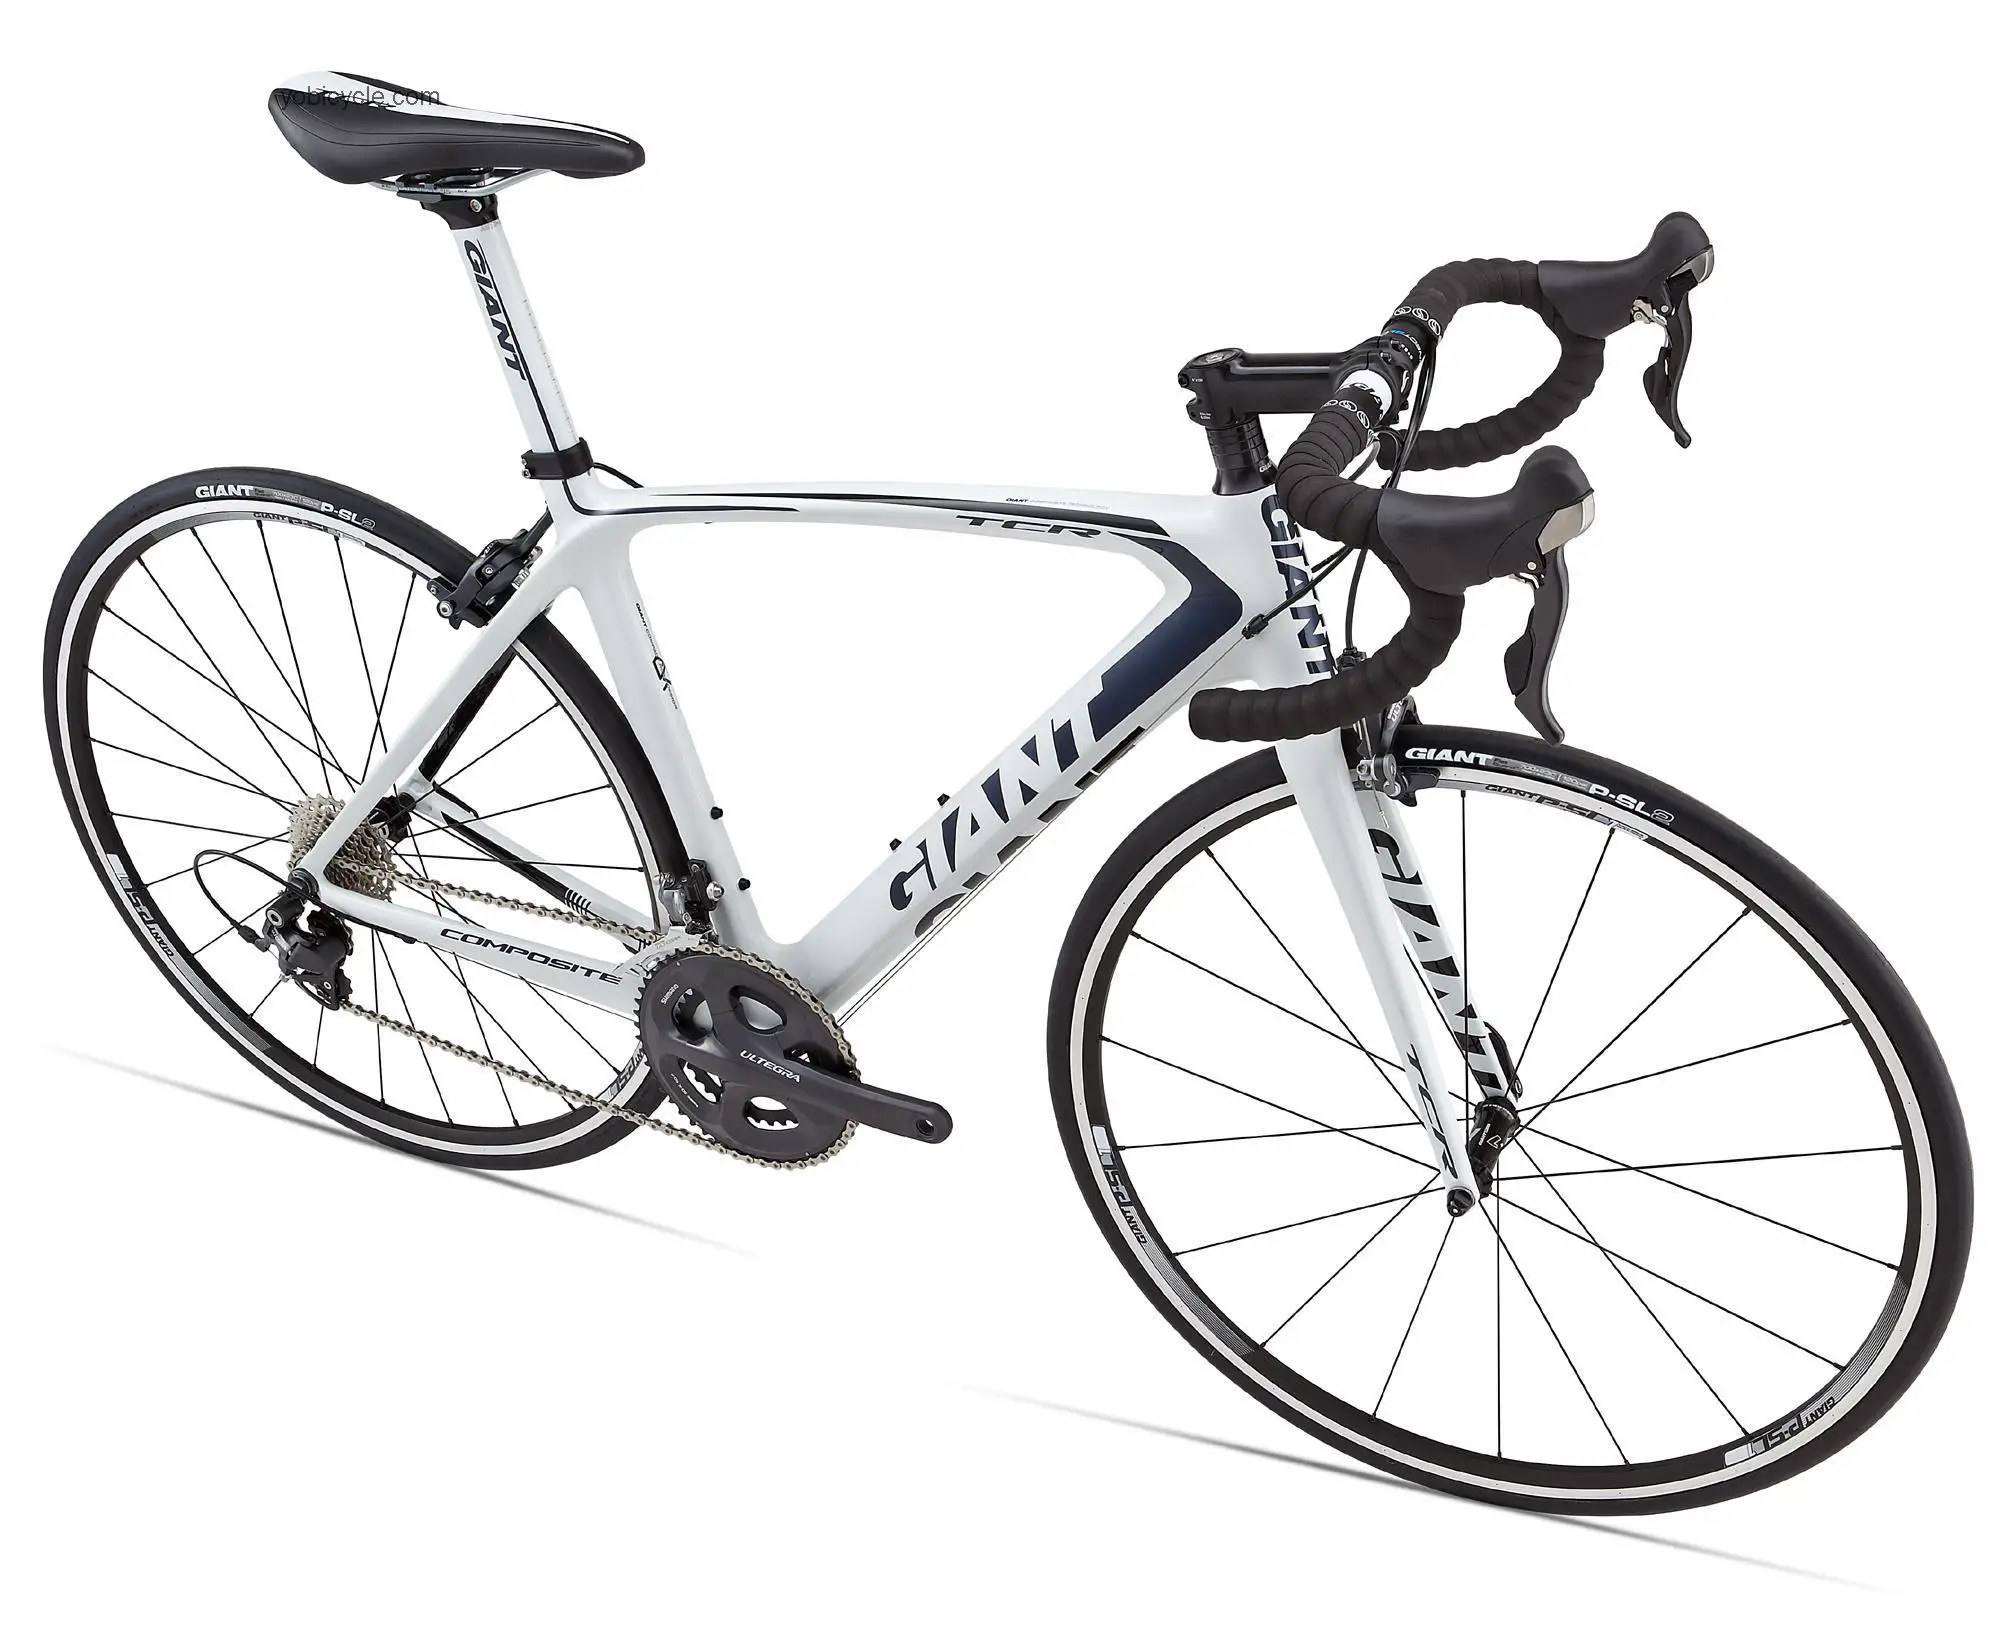 Giant TCR Composite 1 2013 comparison online with competitors